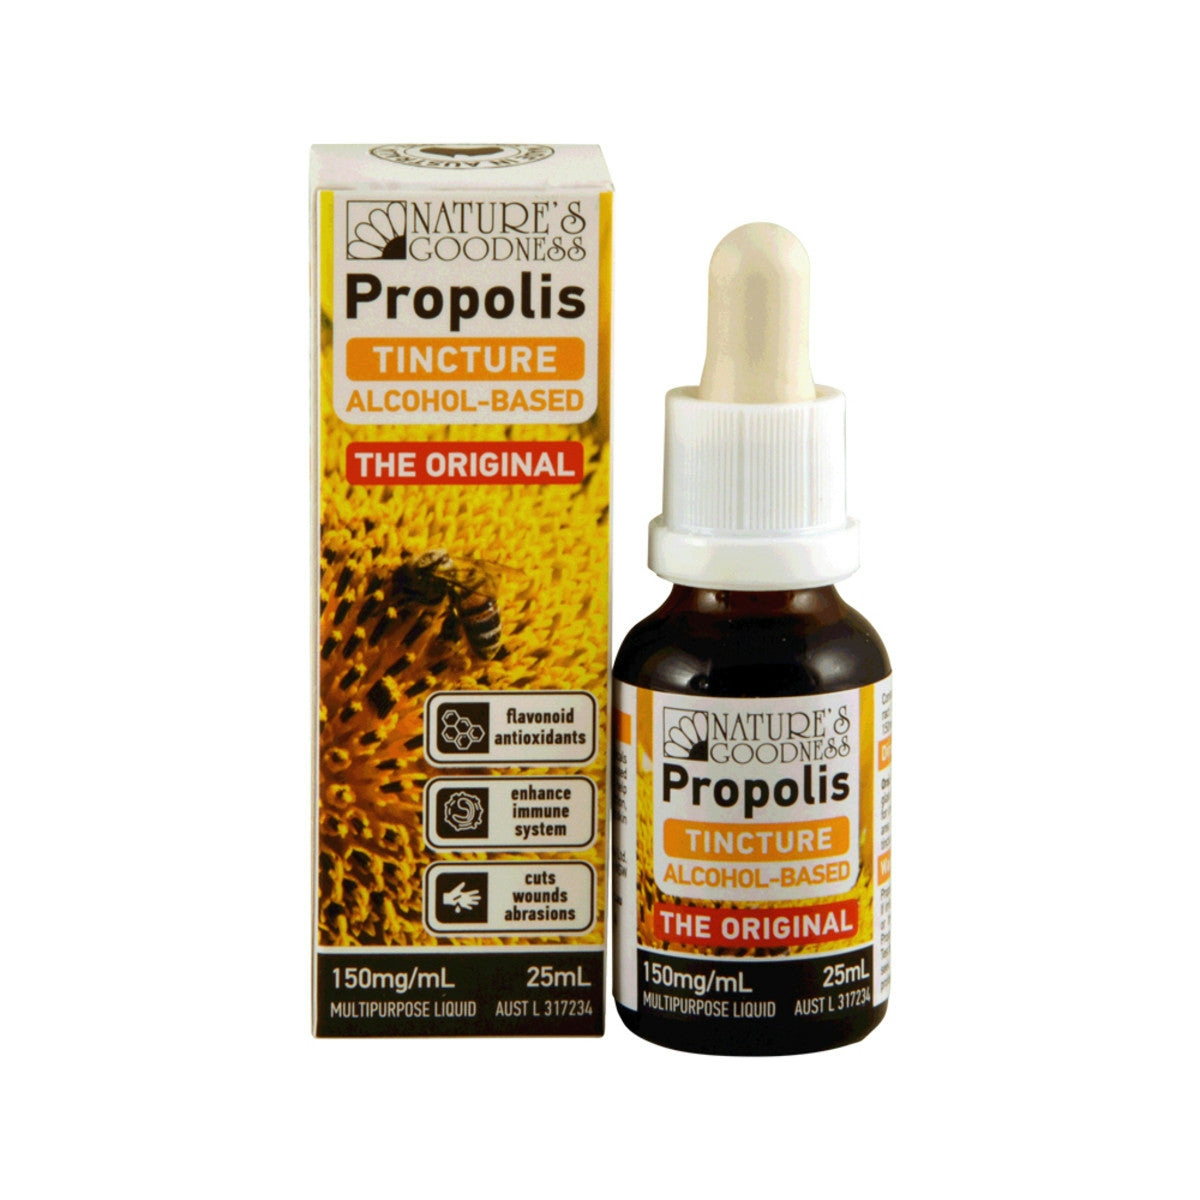 image of Nature's Goodness Propolis Tincture (The Original) 150mg/ml 25ml on white background